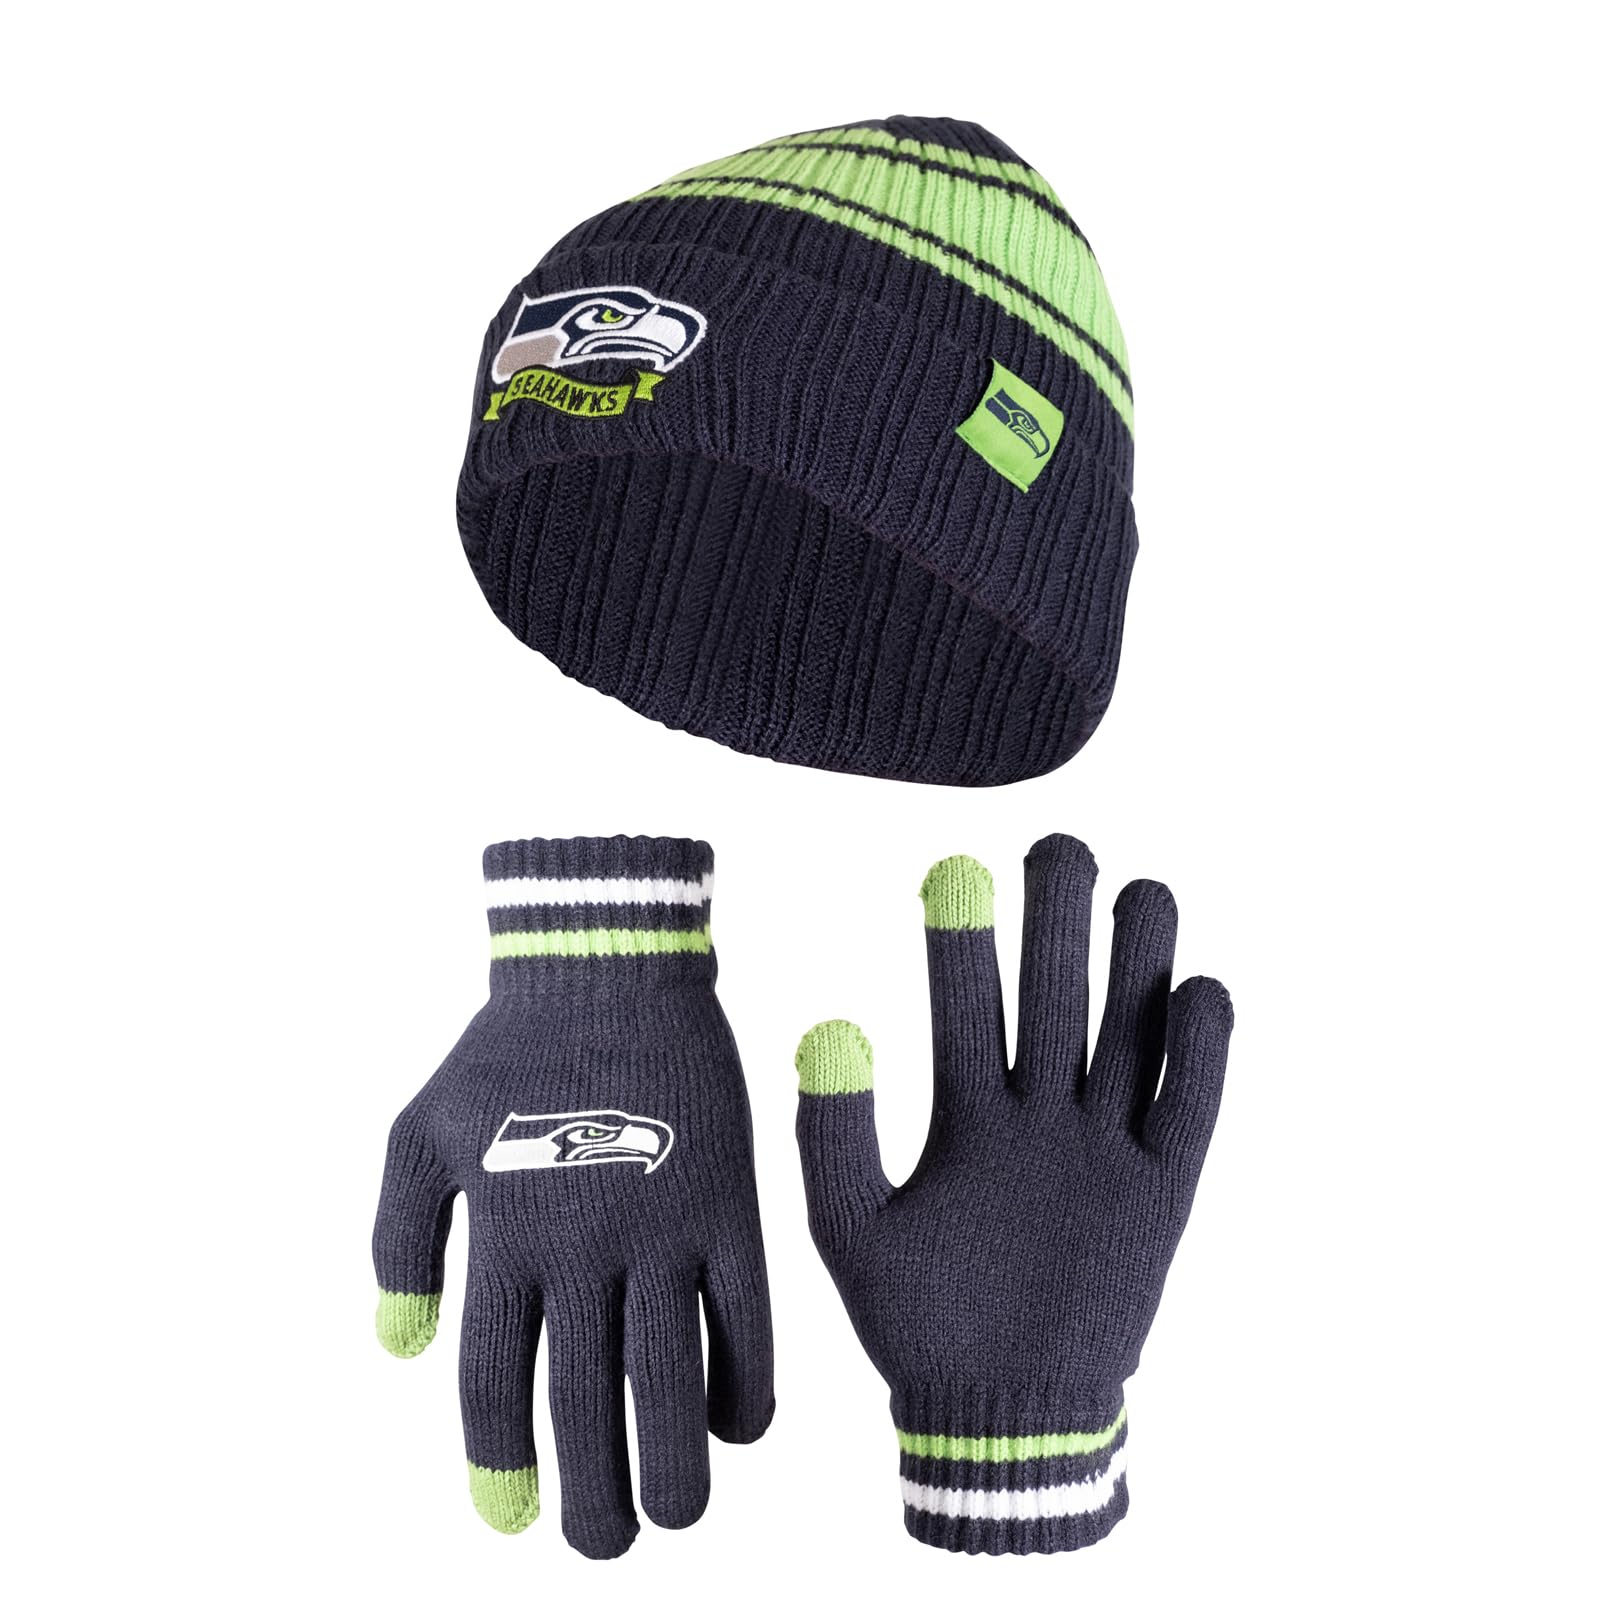 Ultra Game NFL Seattle Seahawks Womens Super Soft Team Stripe Winter Beanie Knit Hat with Extra Warm Touch Screen Gloves|Seattle Seahawks - UltraGameShop